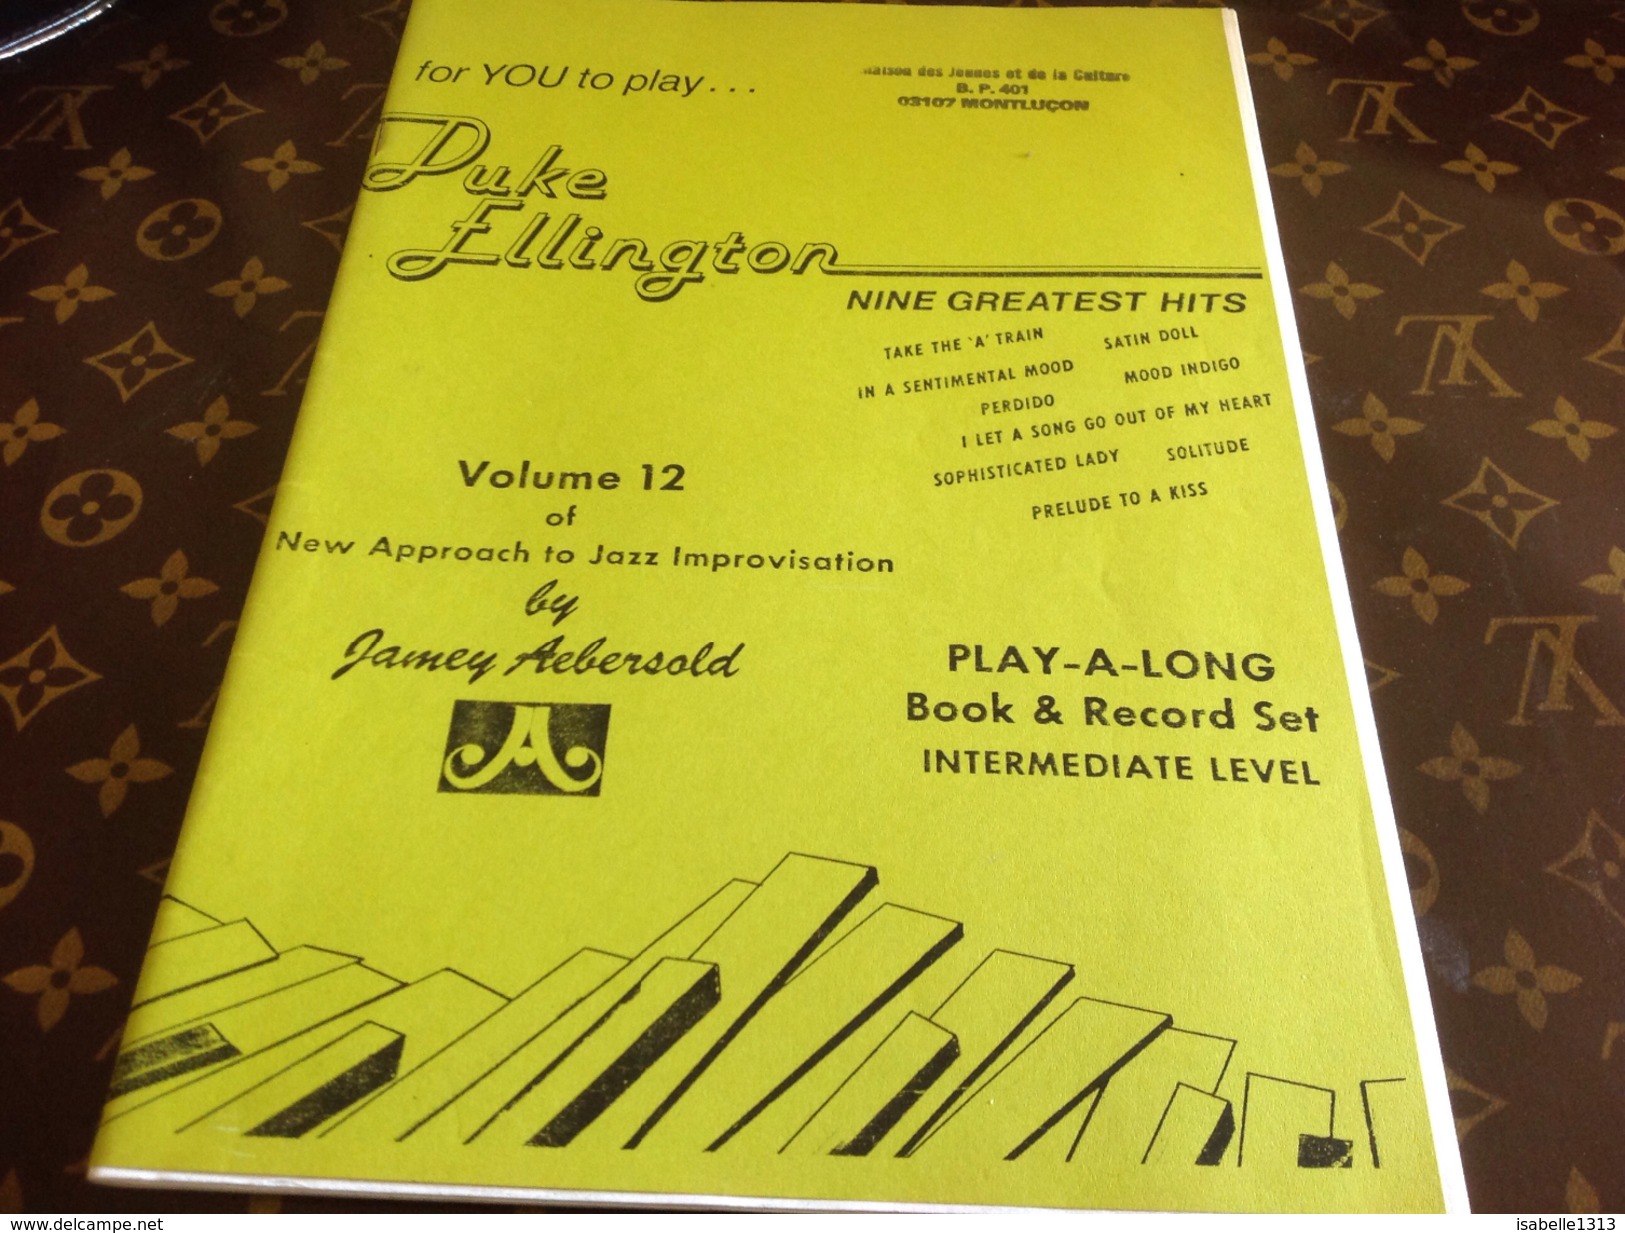 For You To Play Duke Fllington Jazz - Culture